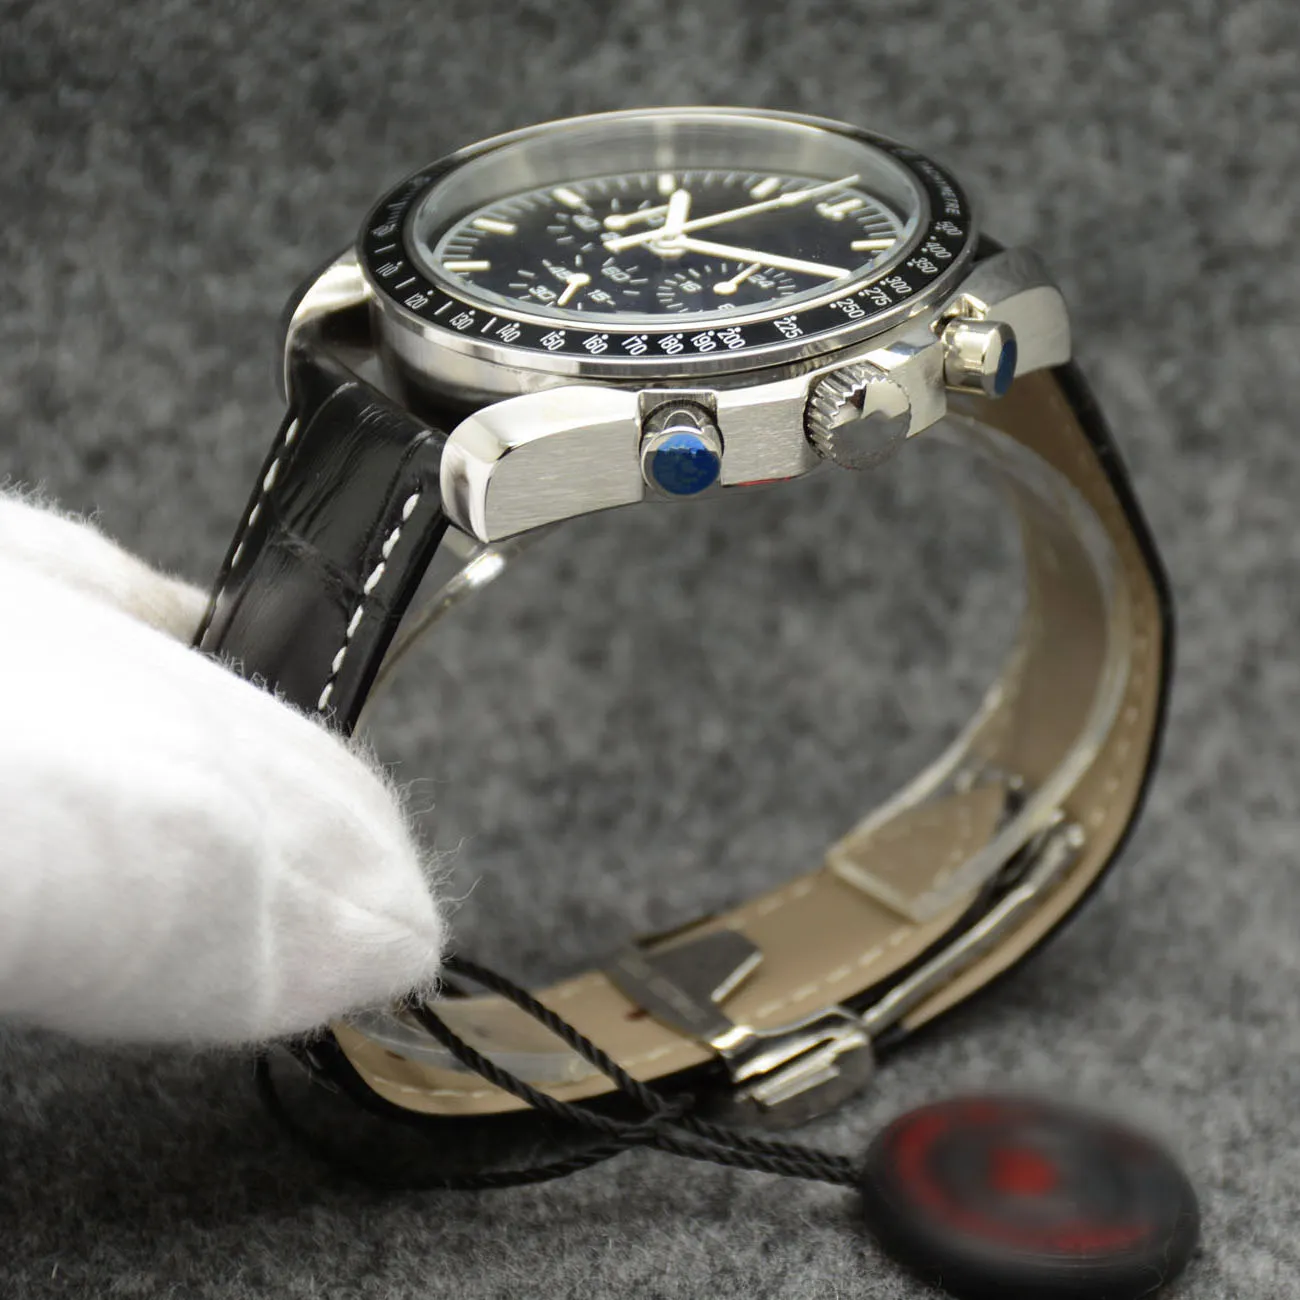 44mm Quartz Chronsograph Date Mens Watches Red Hands Black Leather Strap Fixed Bezel Toshymeter Markings275Nを示すトップリング